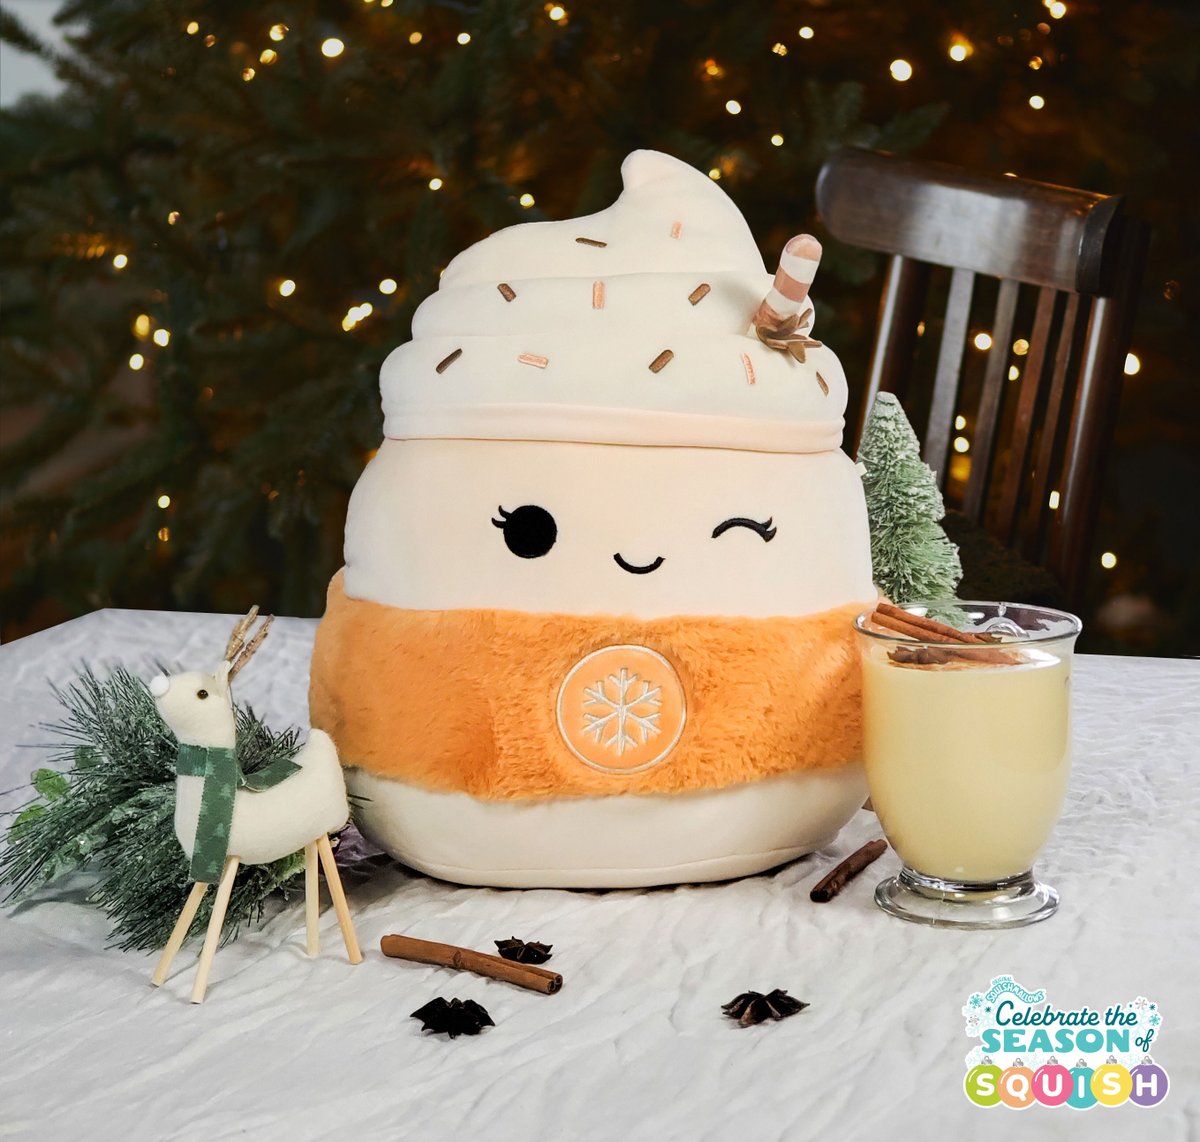 When Christmas Eve and #NationalEggnogDay fall on the same day. Now, that's something to re-JOYCE in. 🥰🎄 #Squishmallows #SquishmallowsSquad #SeasonOfSquish